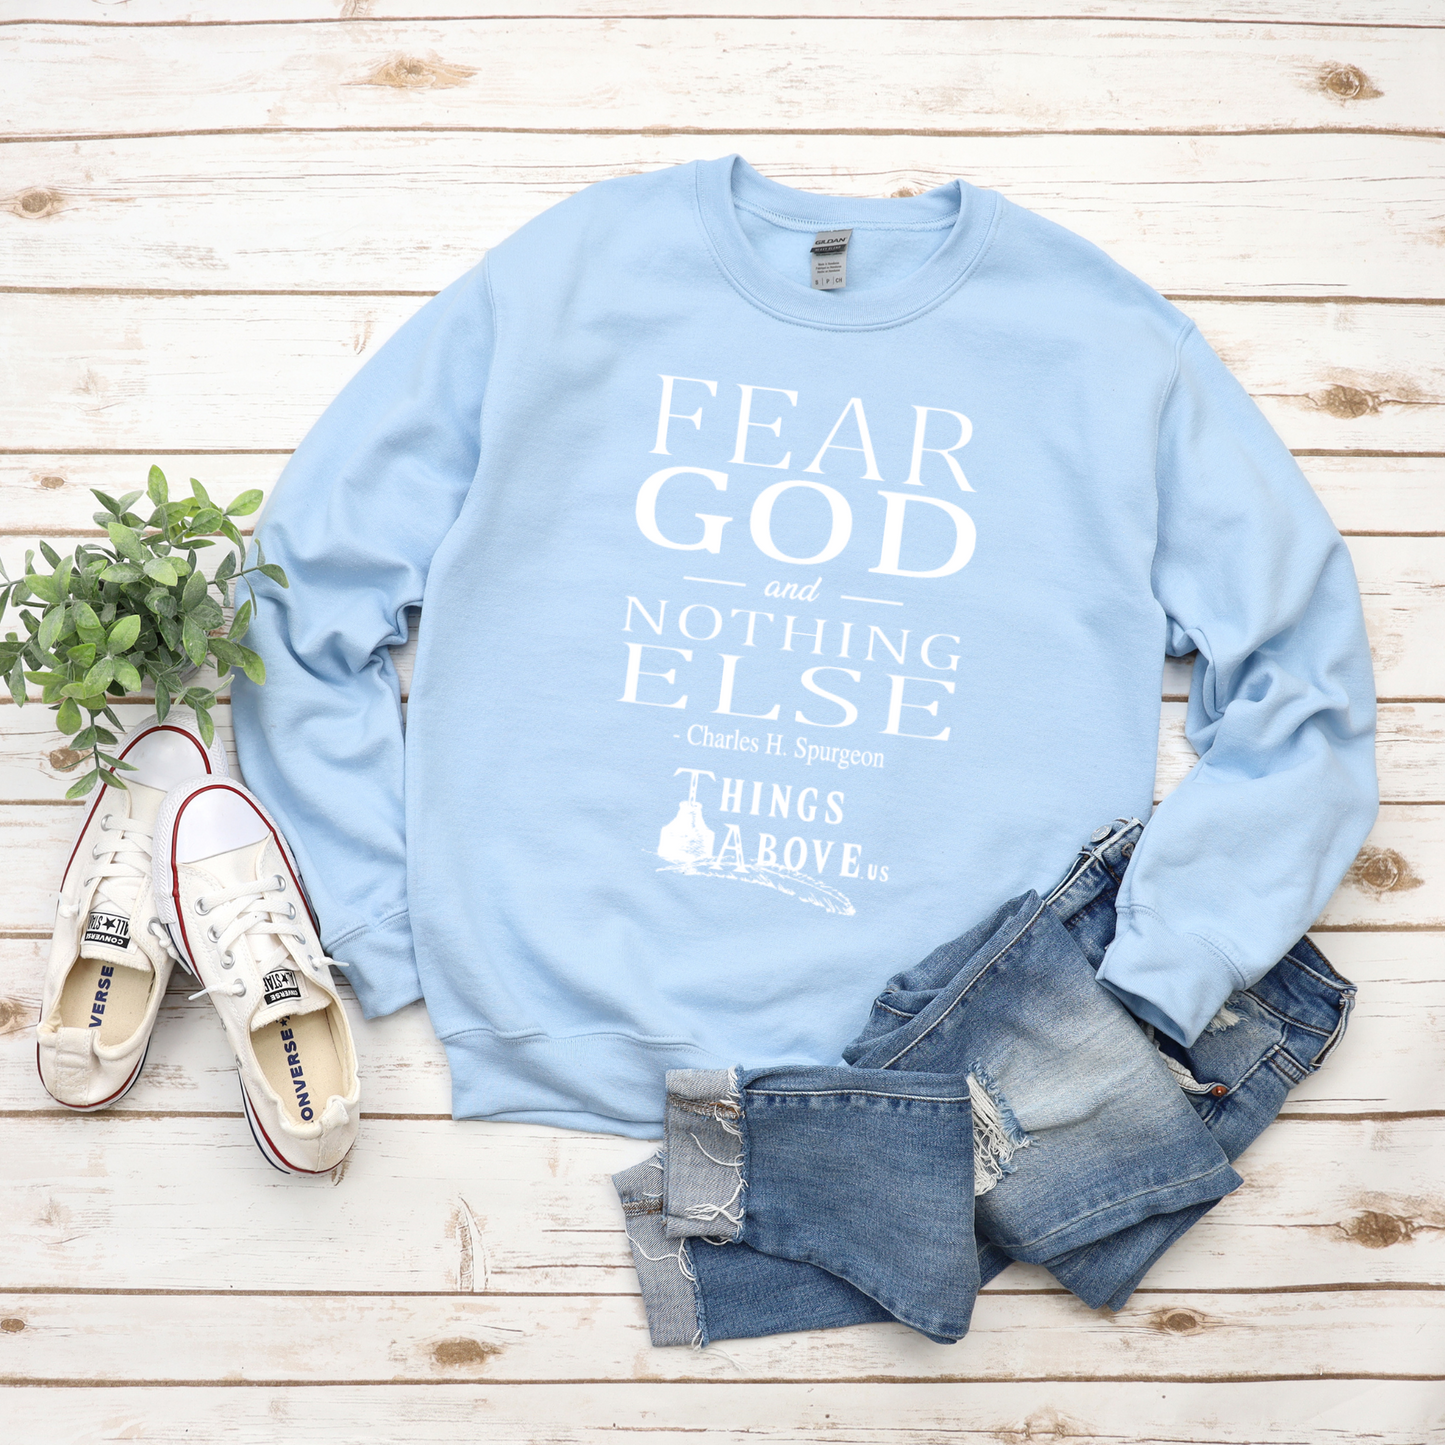 Fear God And Nothing Else Sweatshirt - Things Above.us